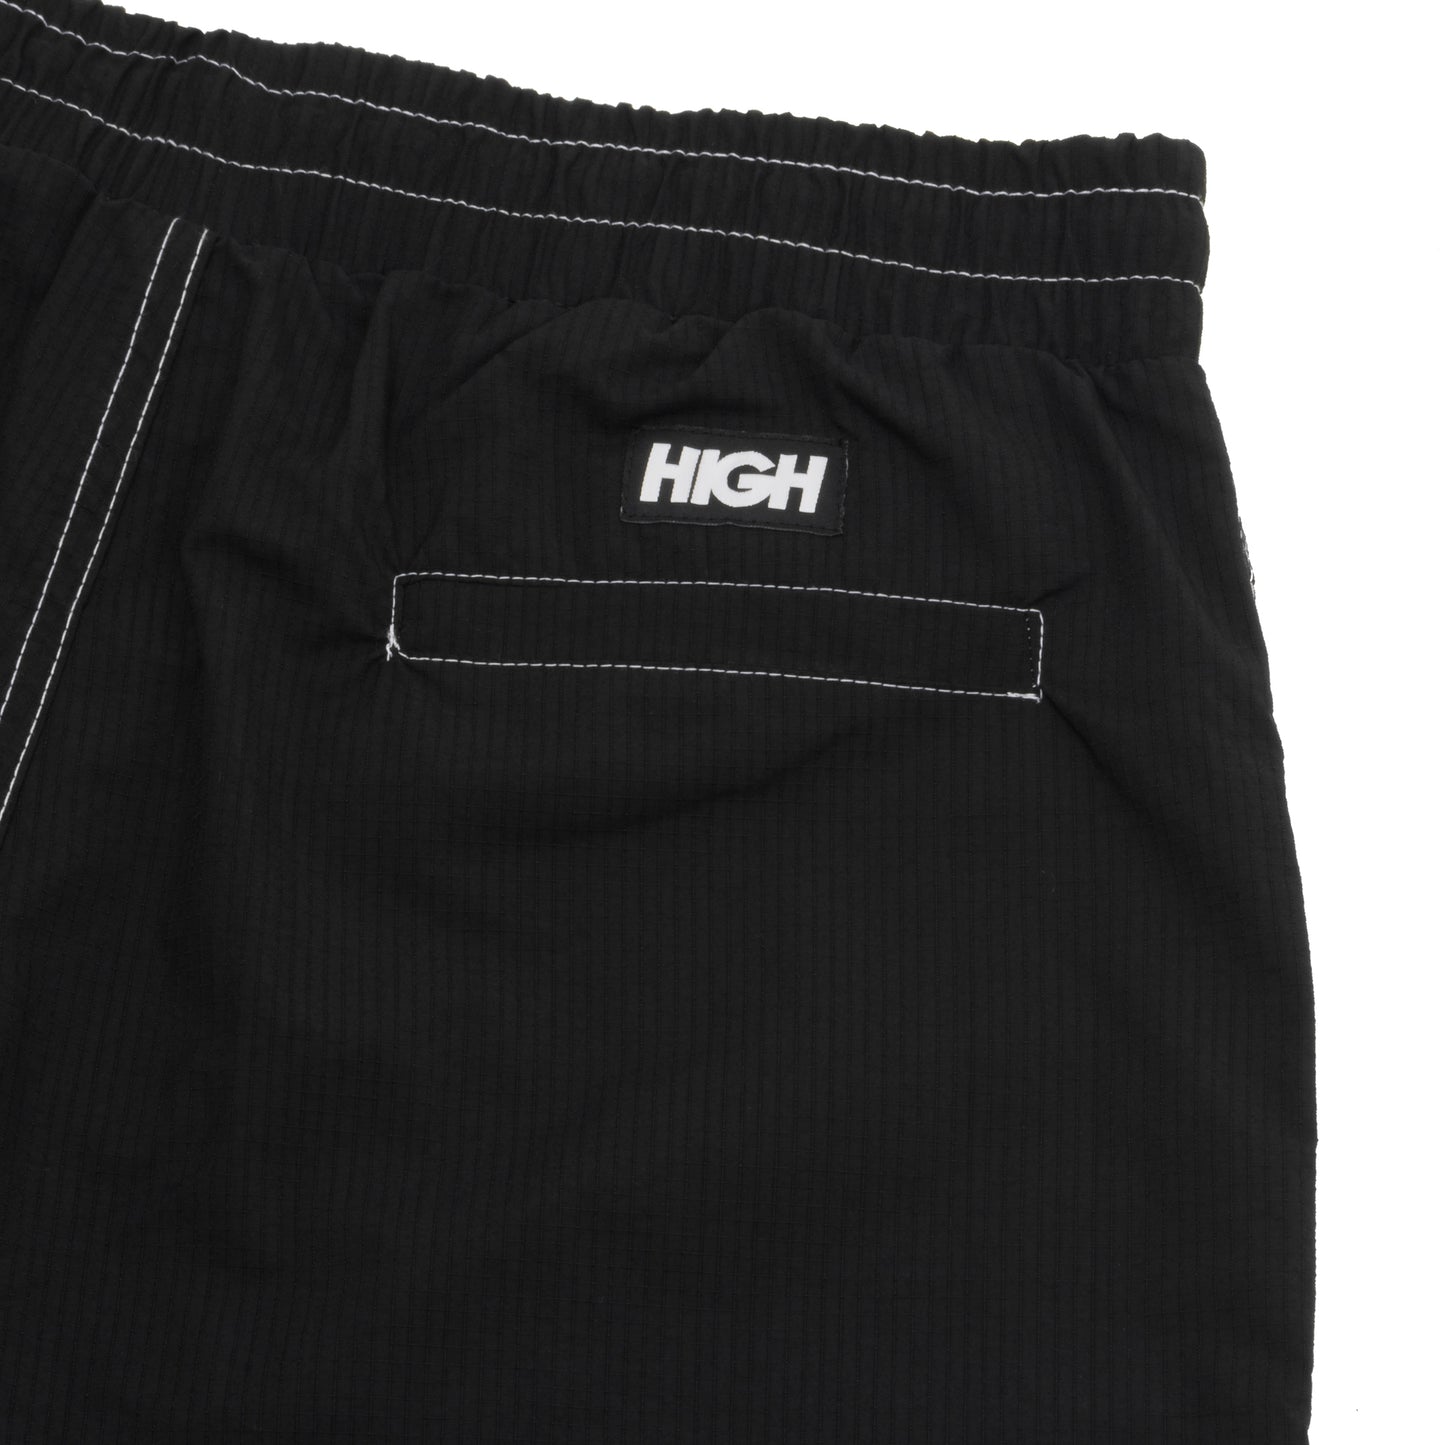 HIGH - Colored Track Pants Black